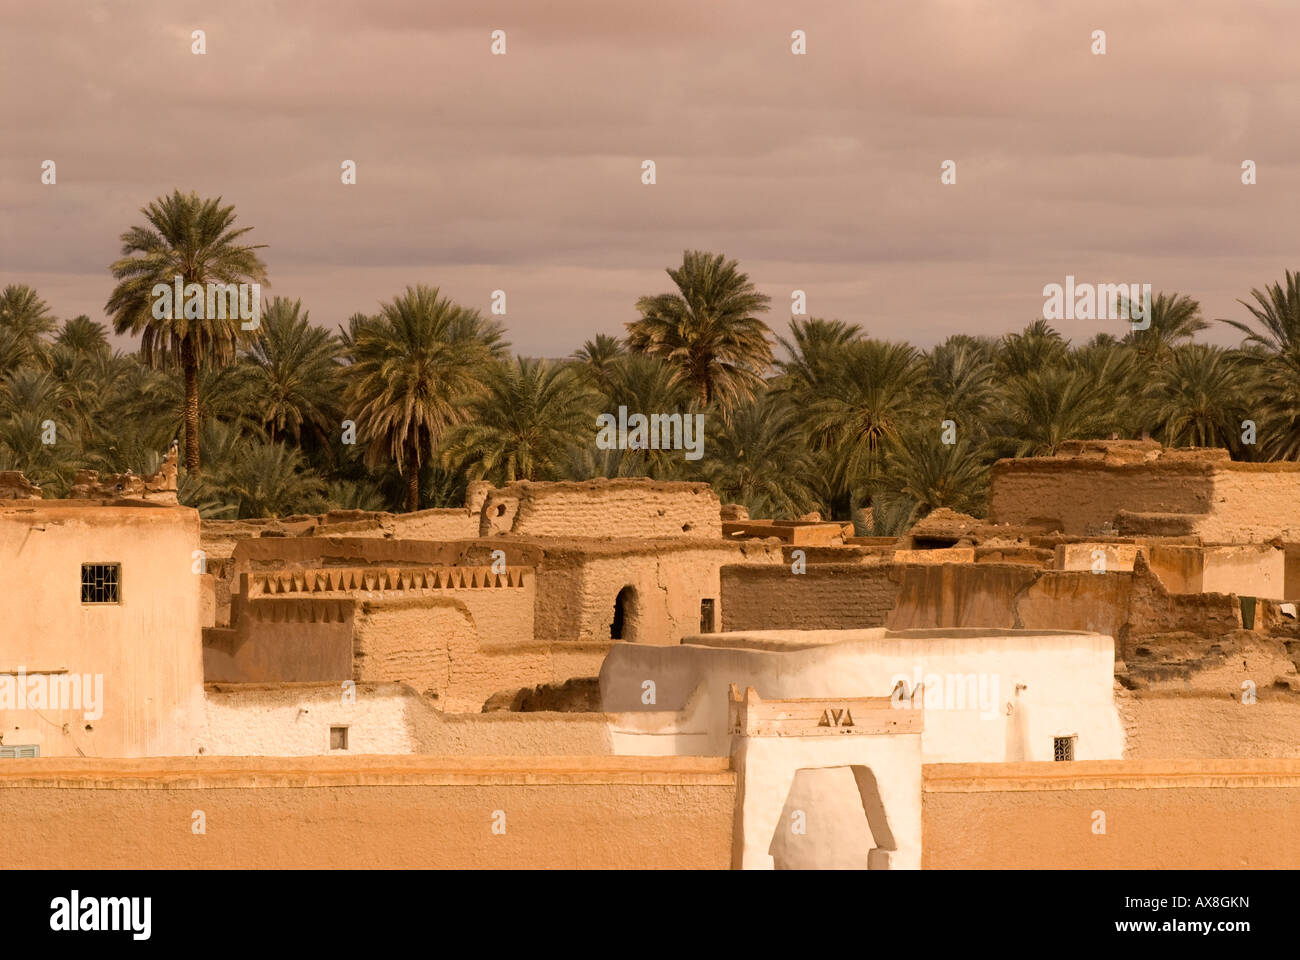 View of the Old City of Ghadames from the cemetery, Libya, North Africa. Stock Photo